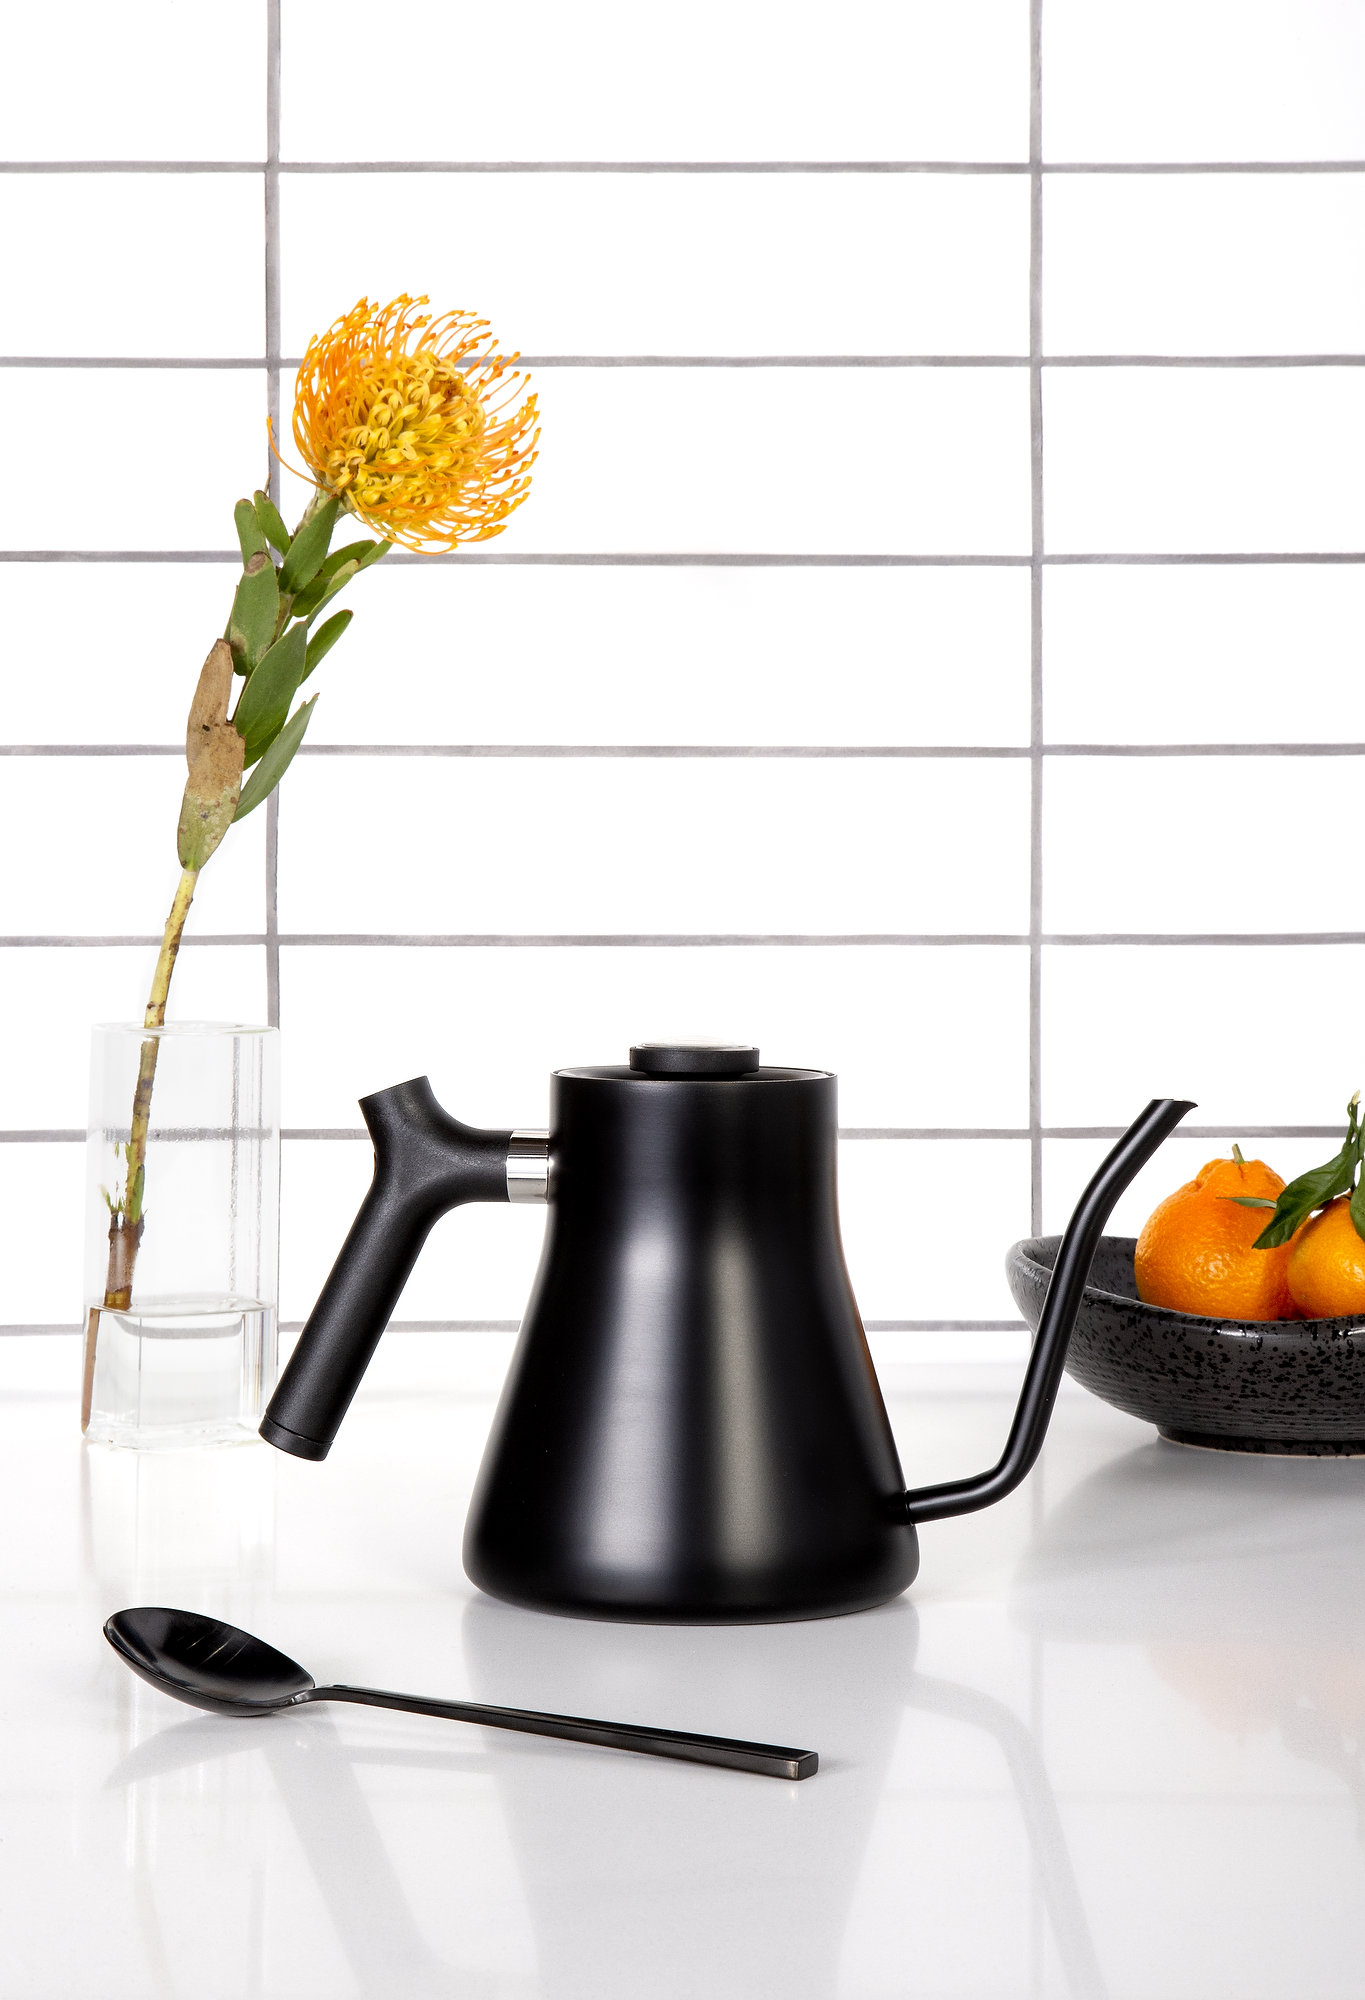 Black teapot on white countertop and white tiled back splash, tea pot is surrounded by a black spoon, black bowl filled with oranges and a single flower in glass vase.